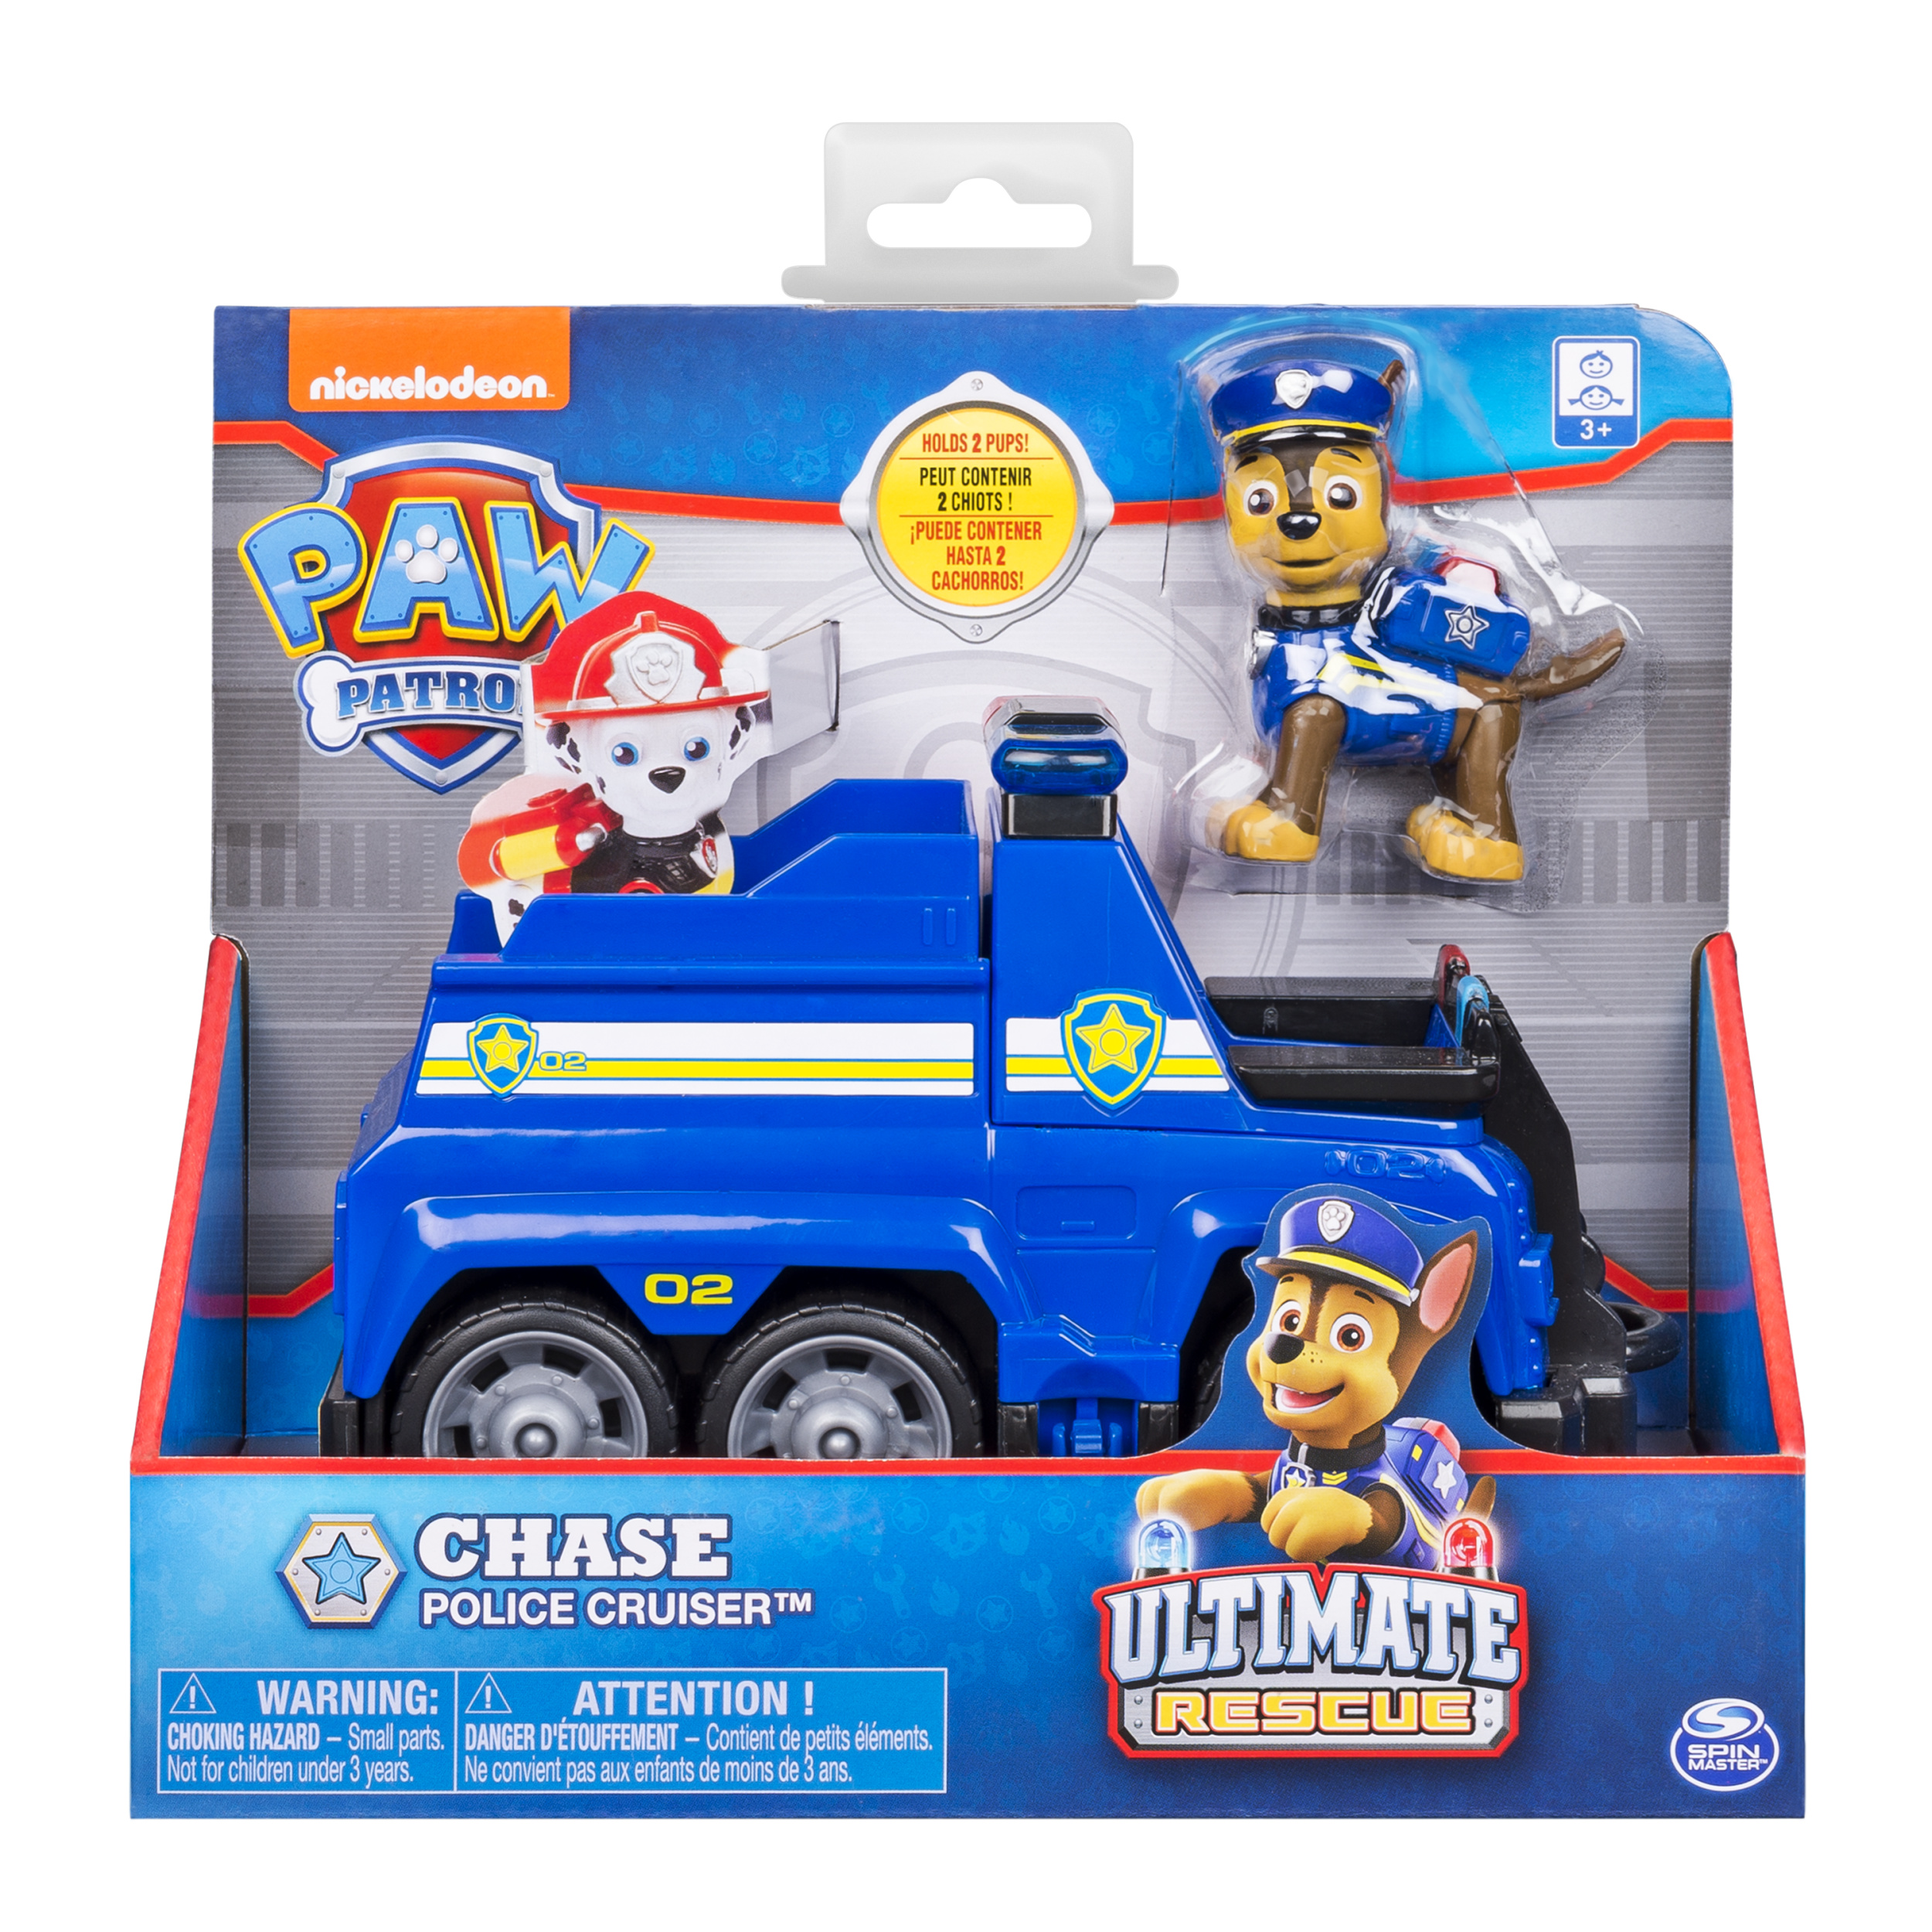 PAW Patrol Ultimate Rescue, Chase’s Ultimate Rescue Police Cruiser with Lifting Seat and Fold-out Barricade, for Ages 3 and Up - image 2 of 7